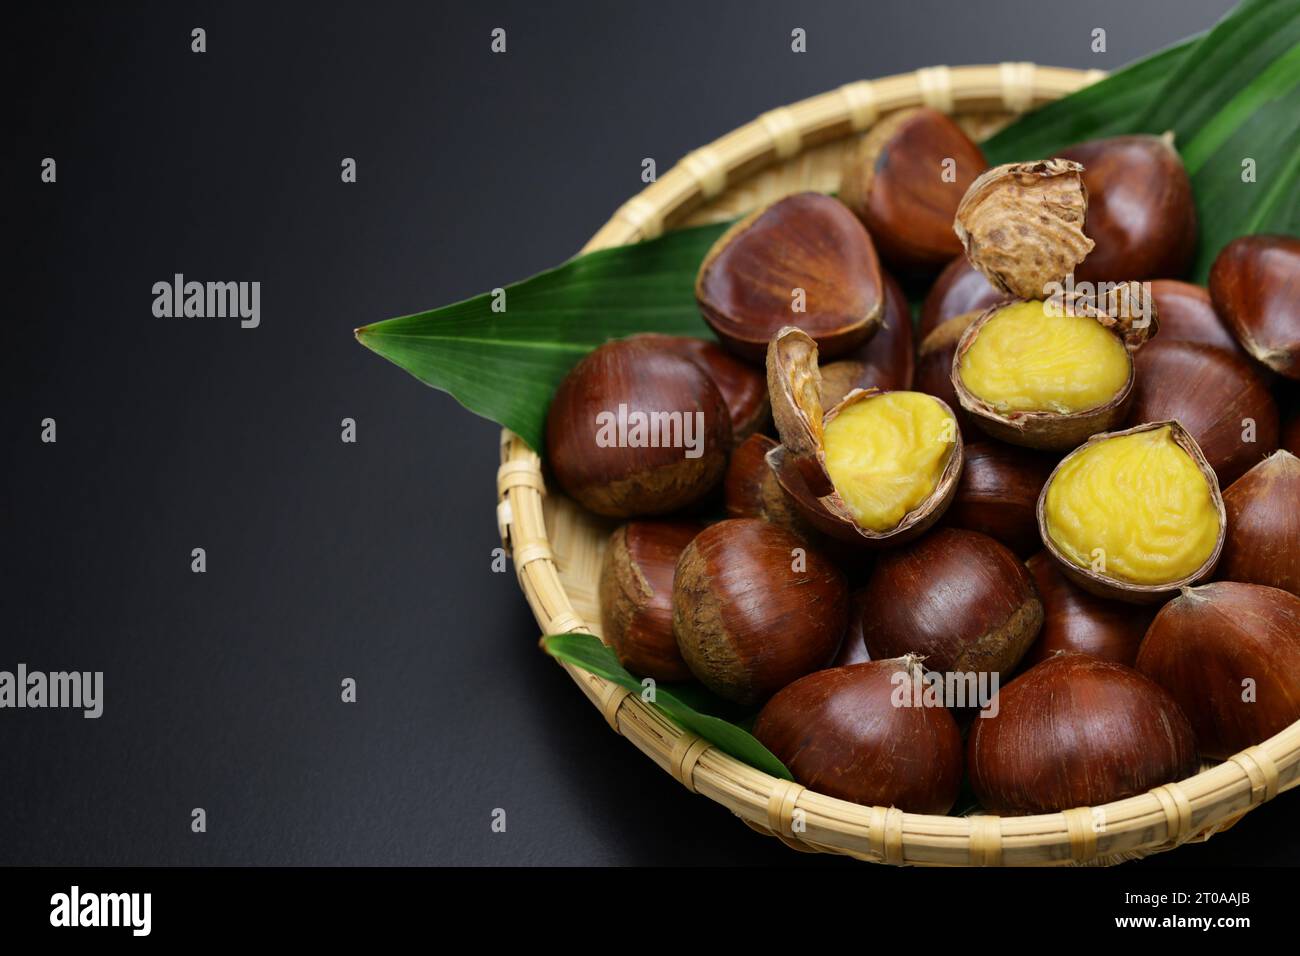 Porotan is a Japanese chestnut whose inner skin is easy to peel. Stock Photo